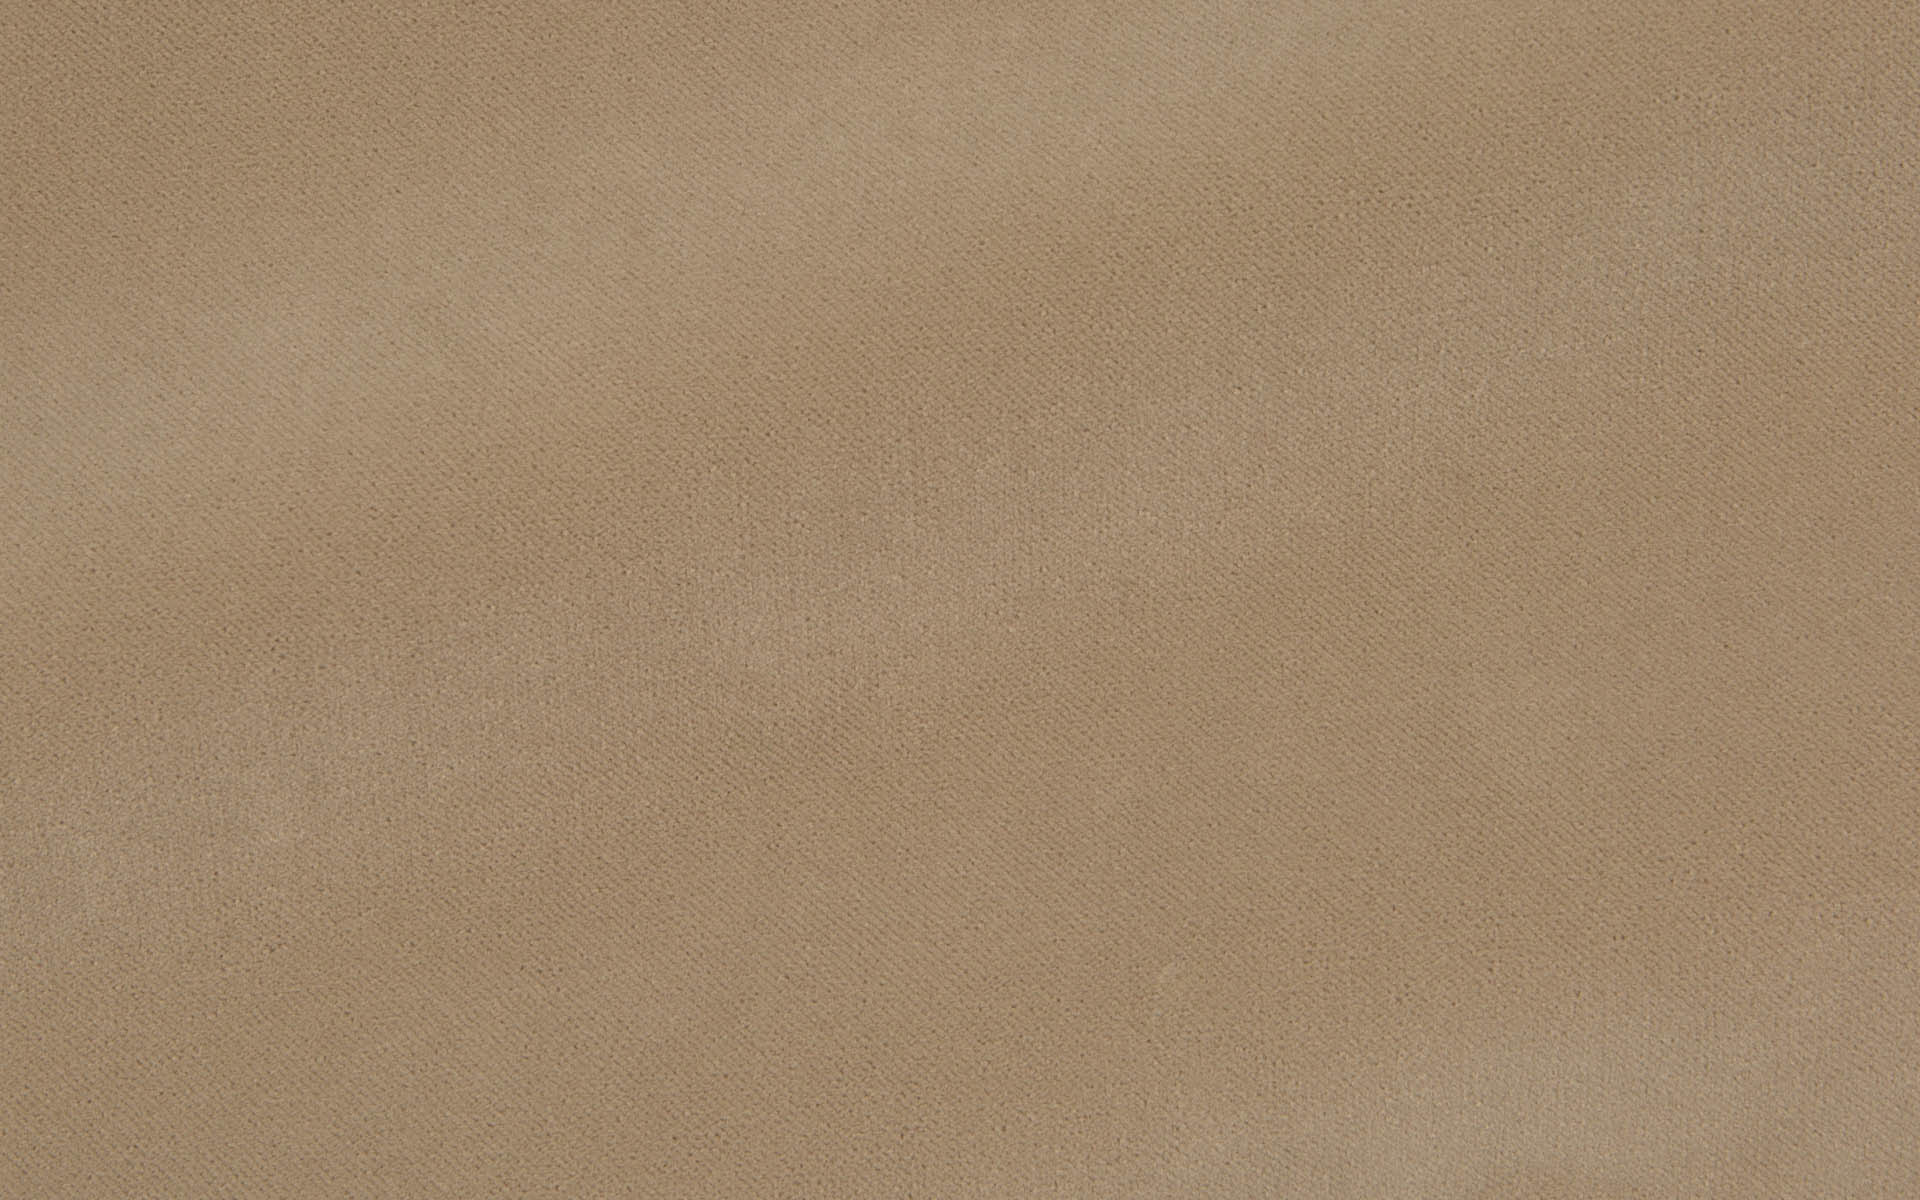 GLANT OUTDOOR VELVET :: Pale Taupe